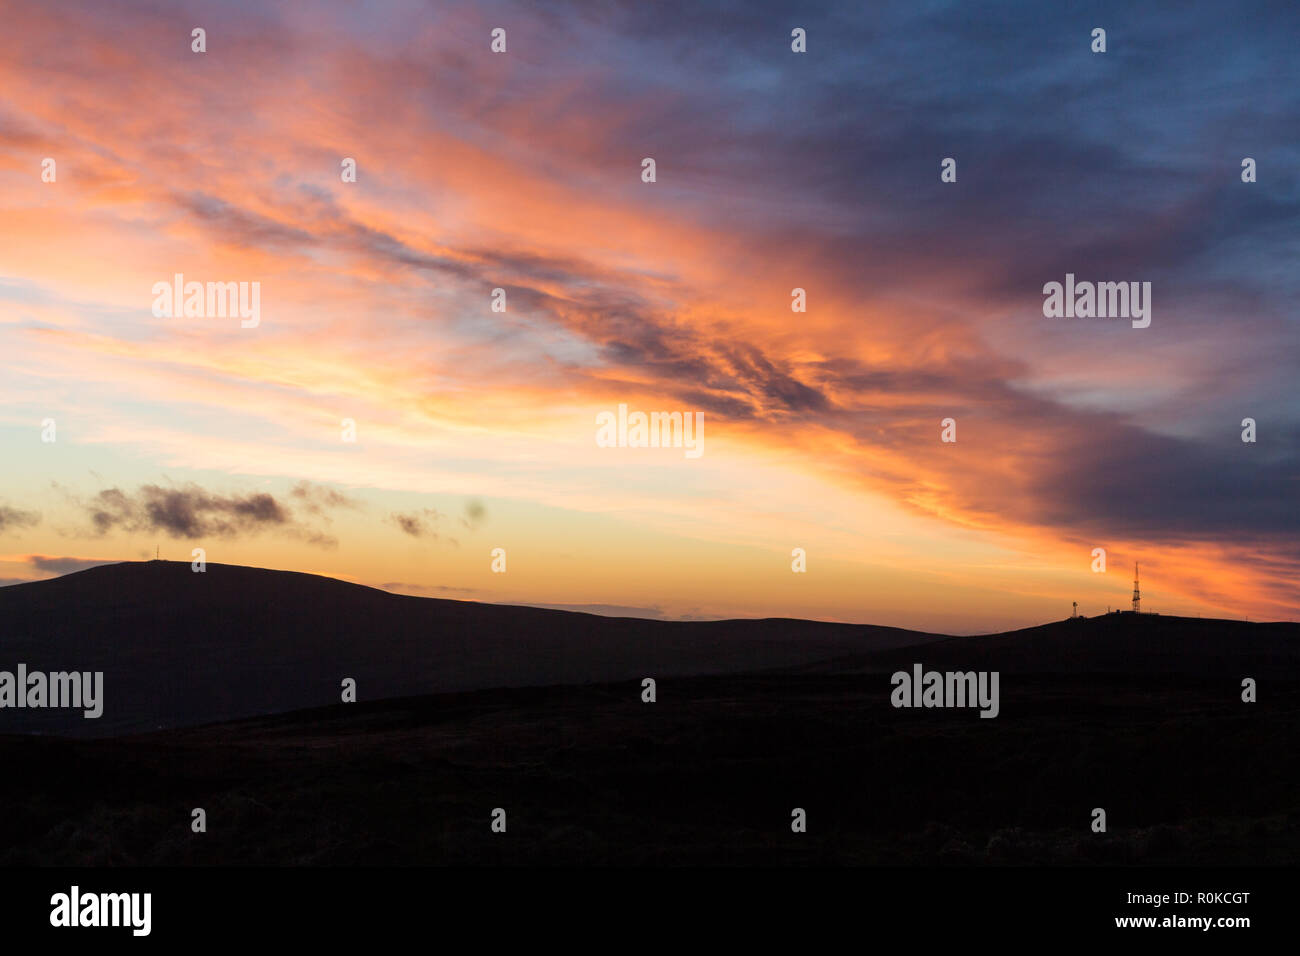 Dramatic sunset over silhouetted Belfast hills. Viewed from summit of Cavehill looking towards Divis Mountain, Belfast, N.Ireland. Stock Photo